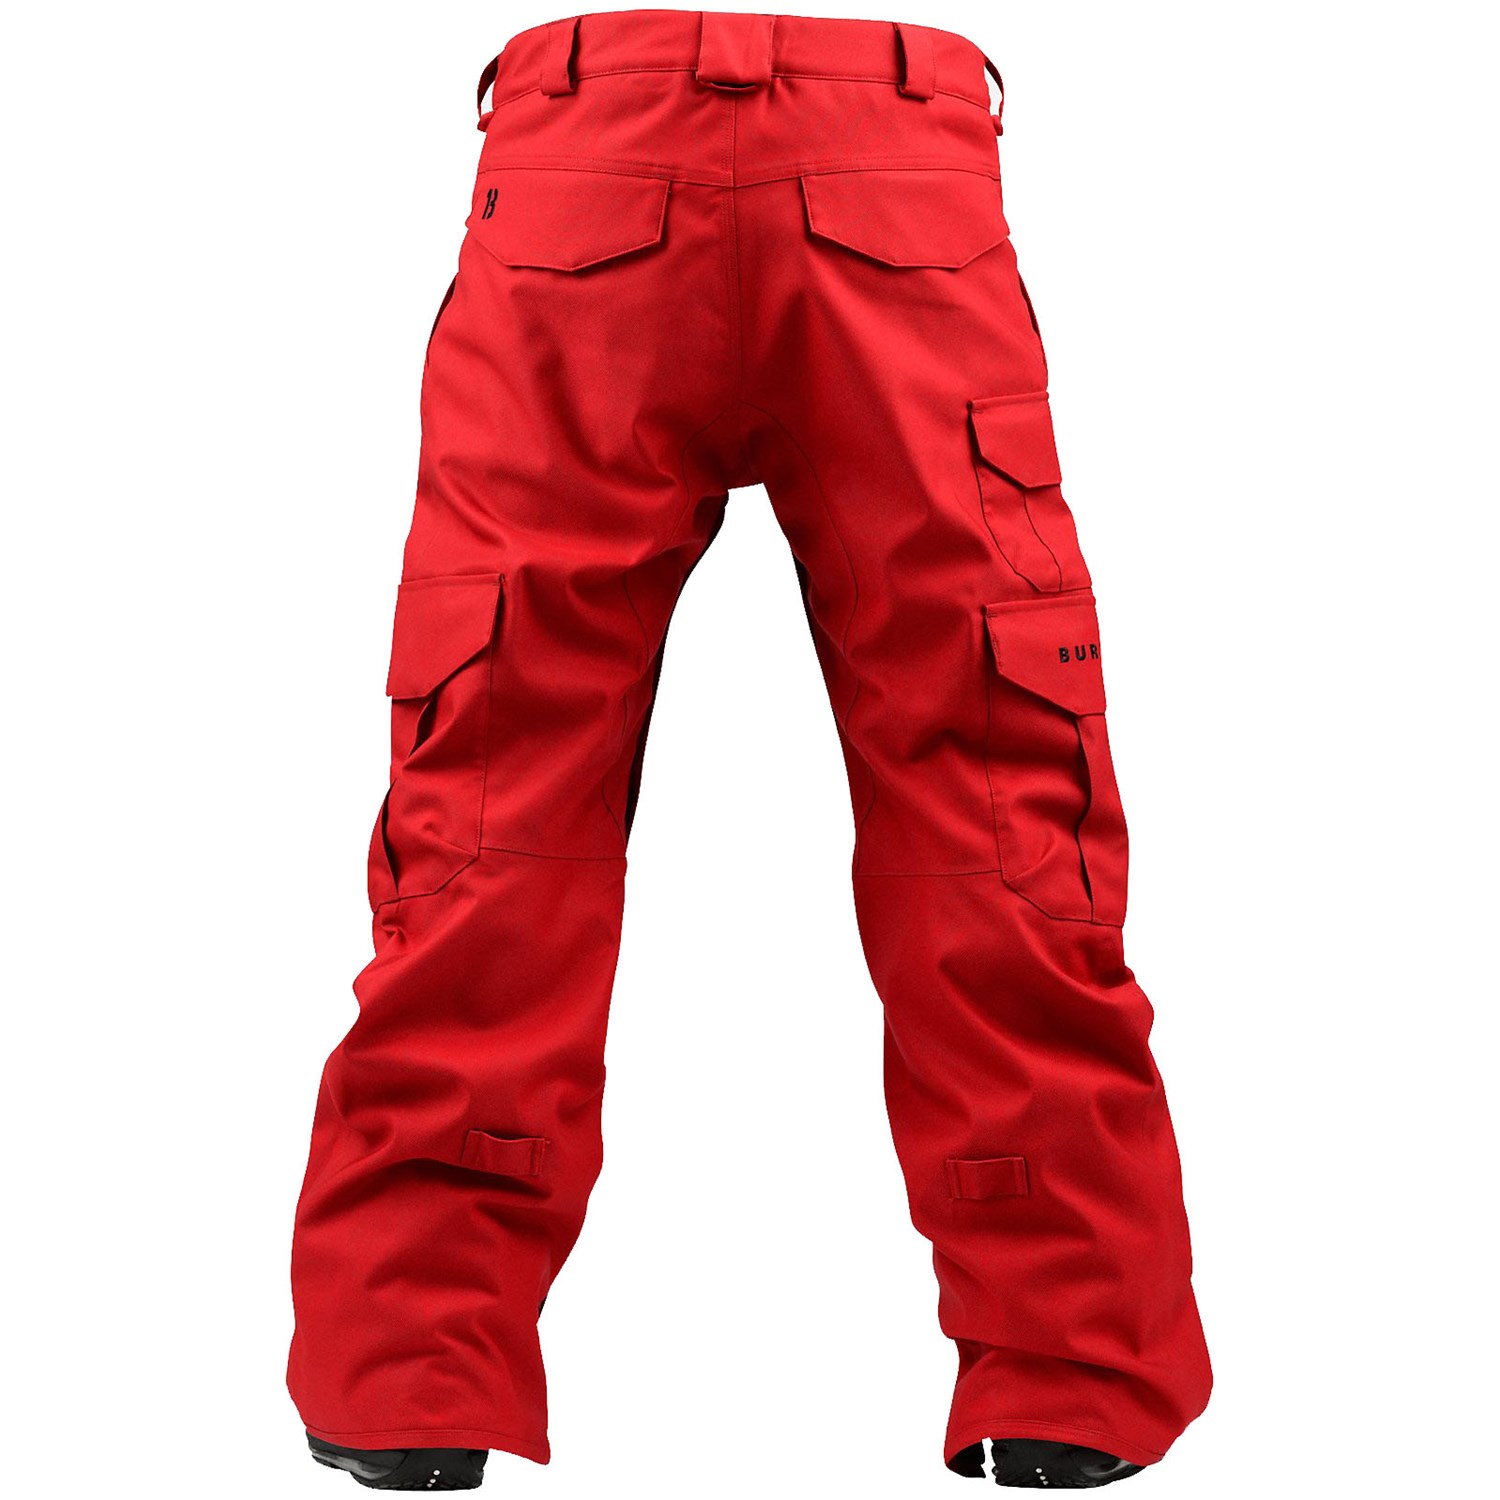 red cargo pants mens